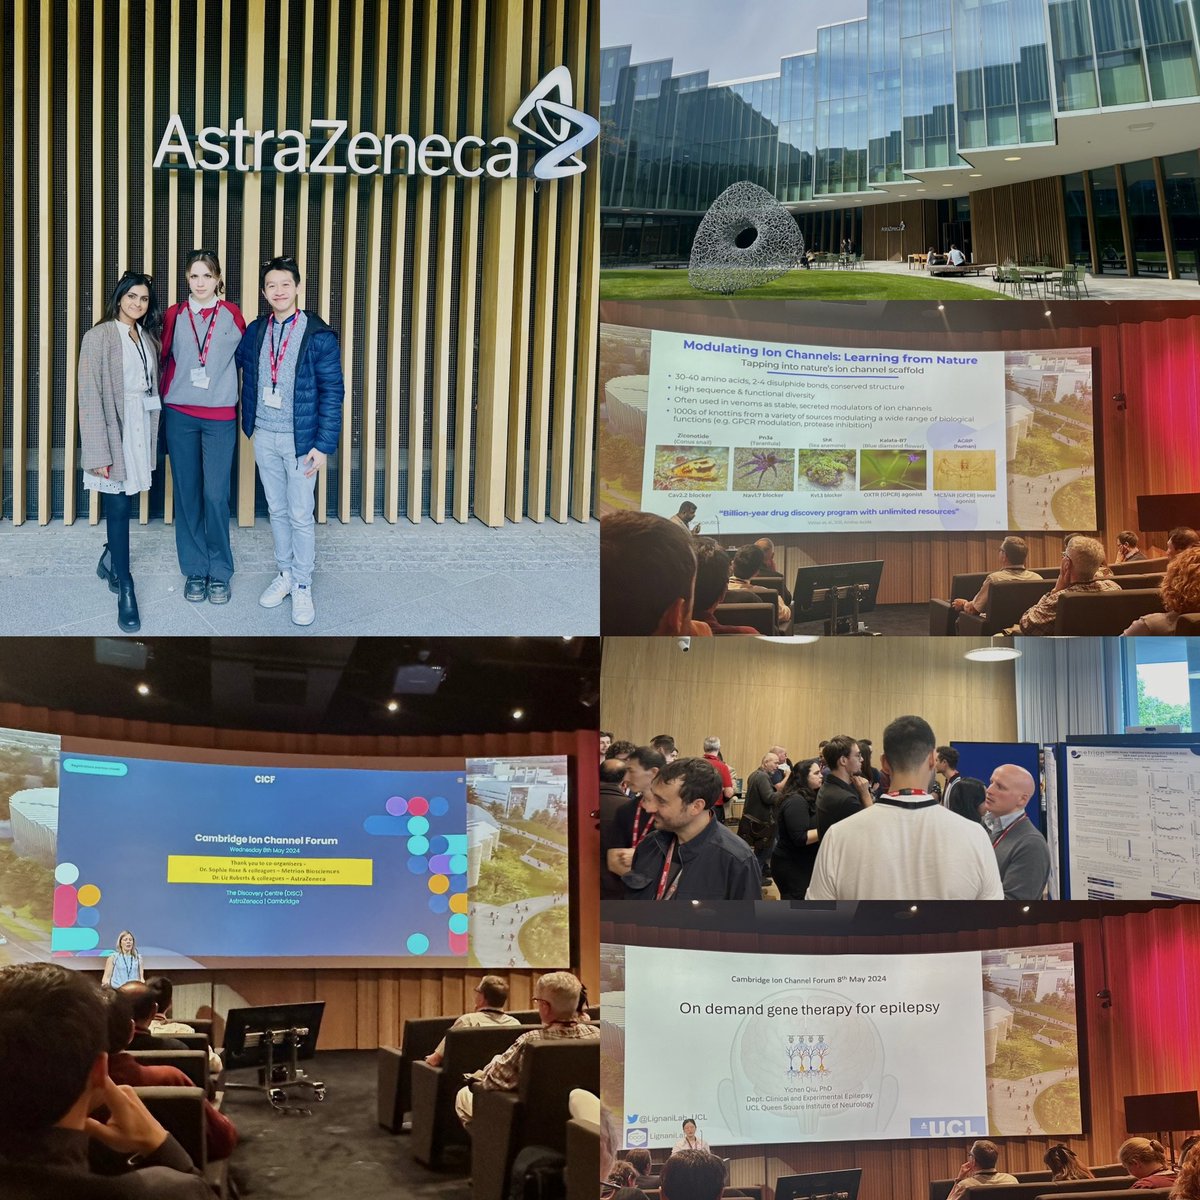 Last week, our lab members attended the Cambridge Ion Channel Forum hosted by @Metrion_Biosci & @AstraZeneca. Talks explored the latest in targeting ion channels in disease, highlighting their role in various disorders and promising new drug & gene therapies. #IonChannels @UCLIoN